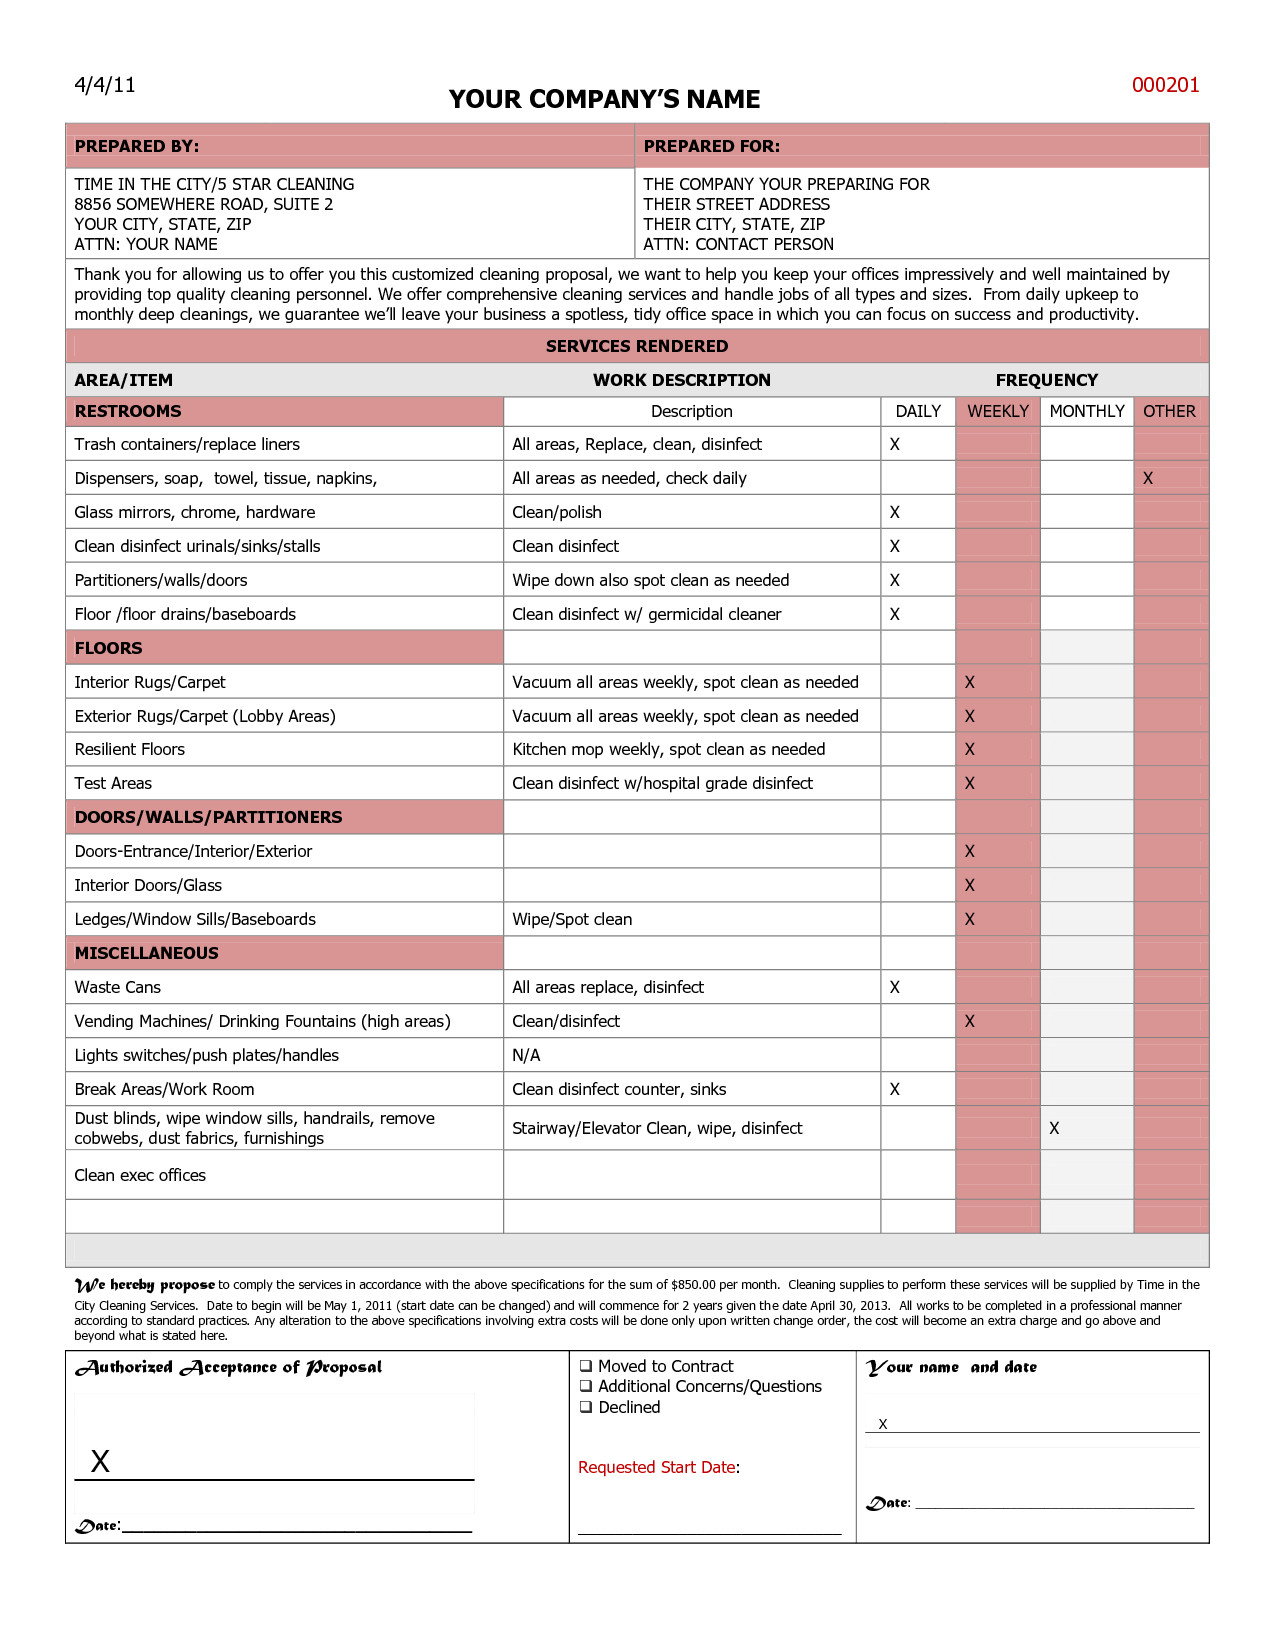 Post Construction Cleaning Proposal Template Janitorial Bid Proposal Template